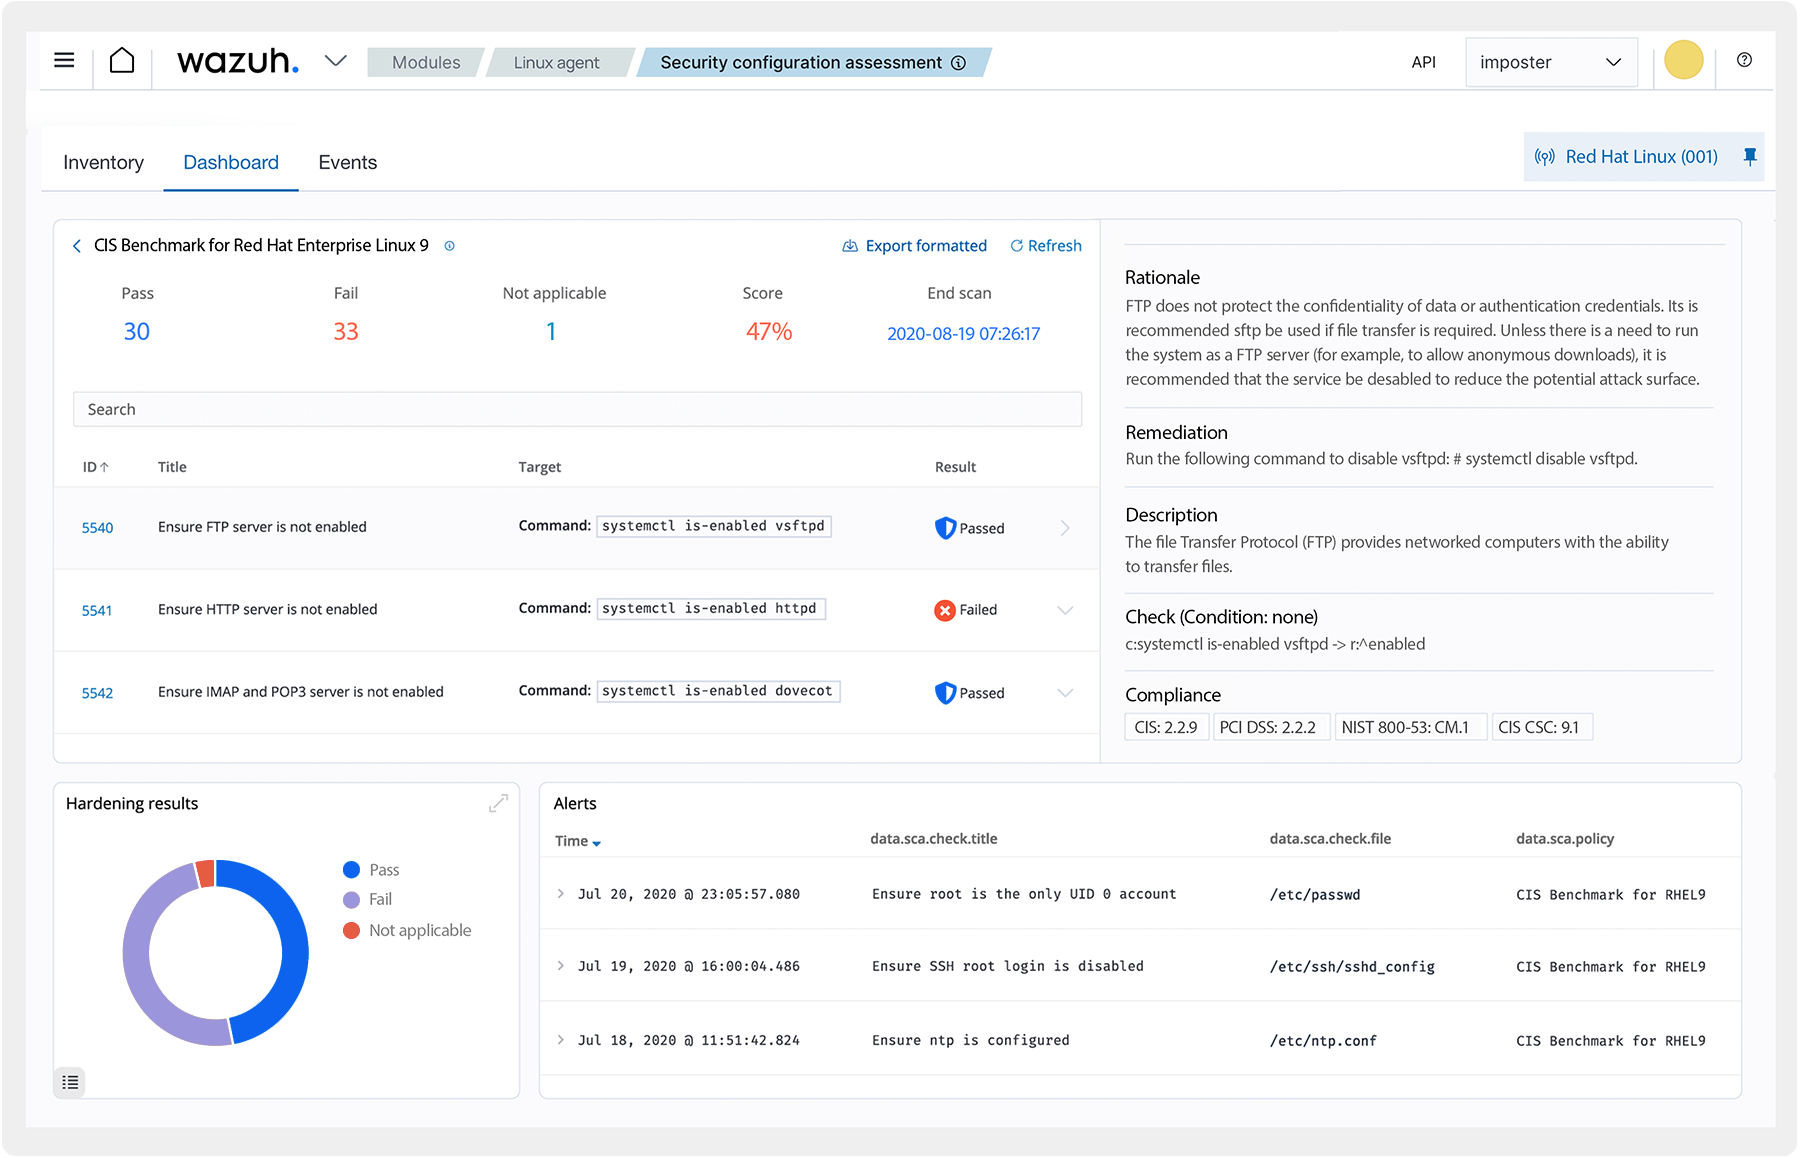 Cloud Security Configuration Assessment dashboard